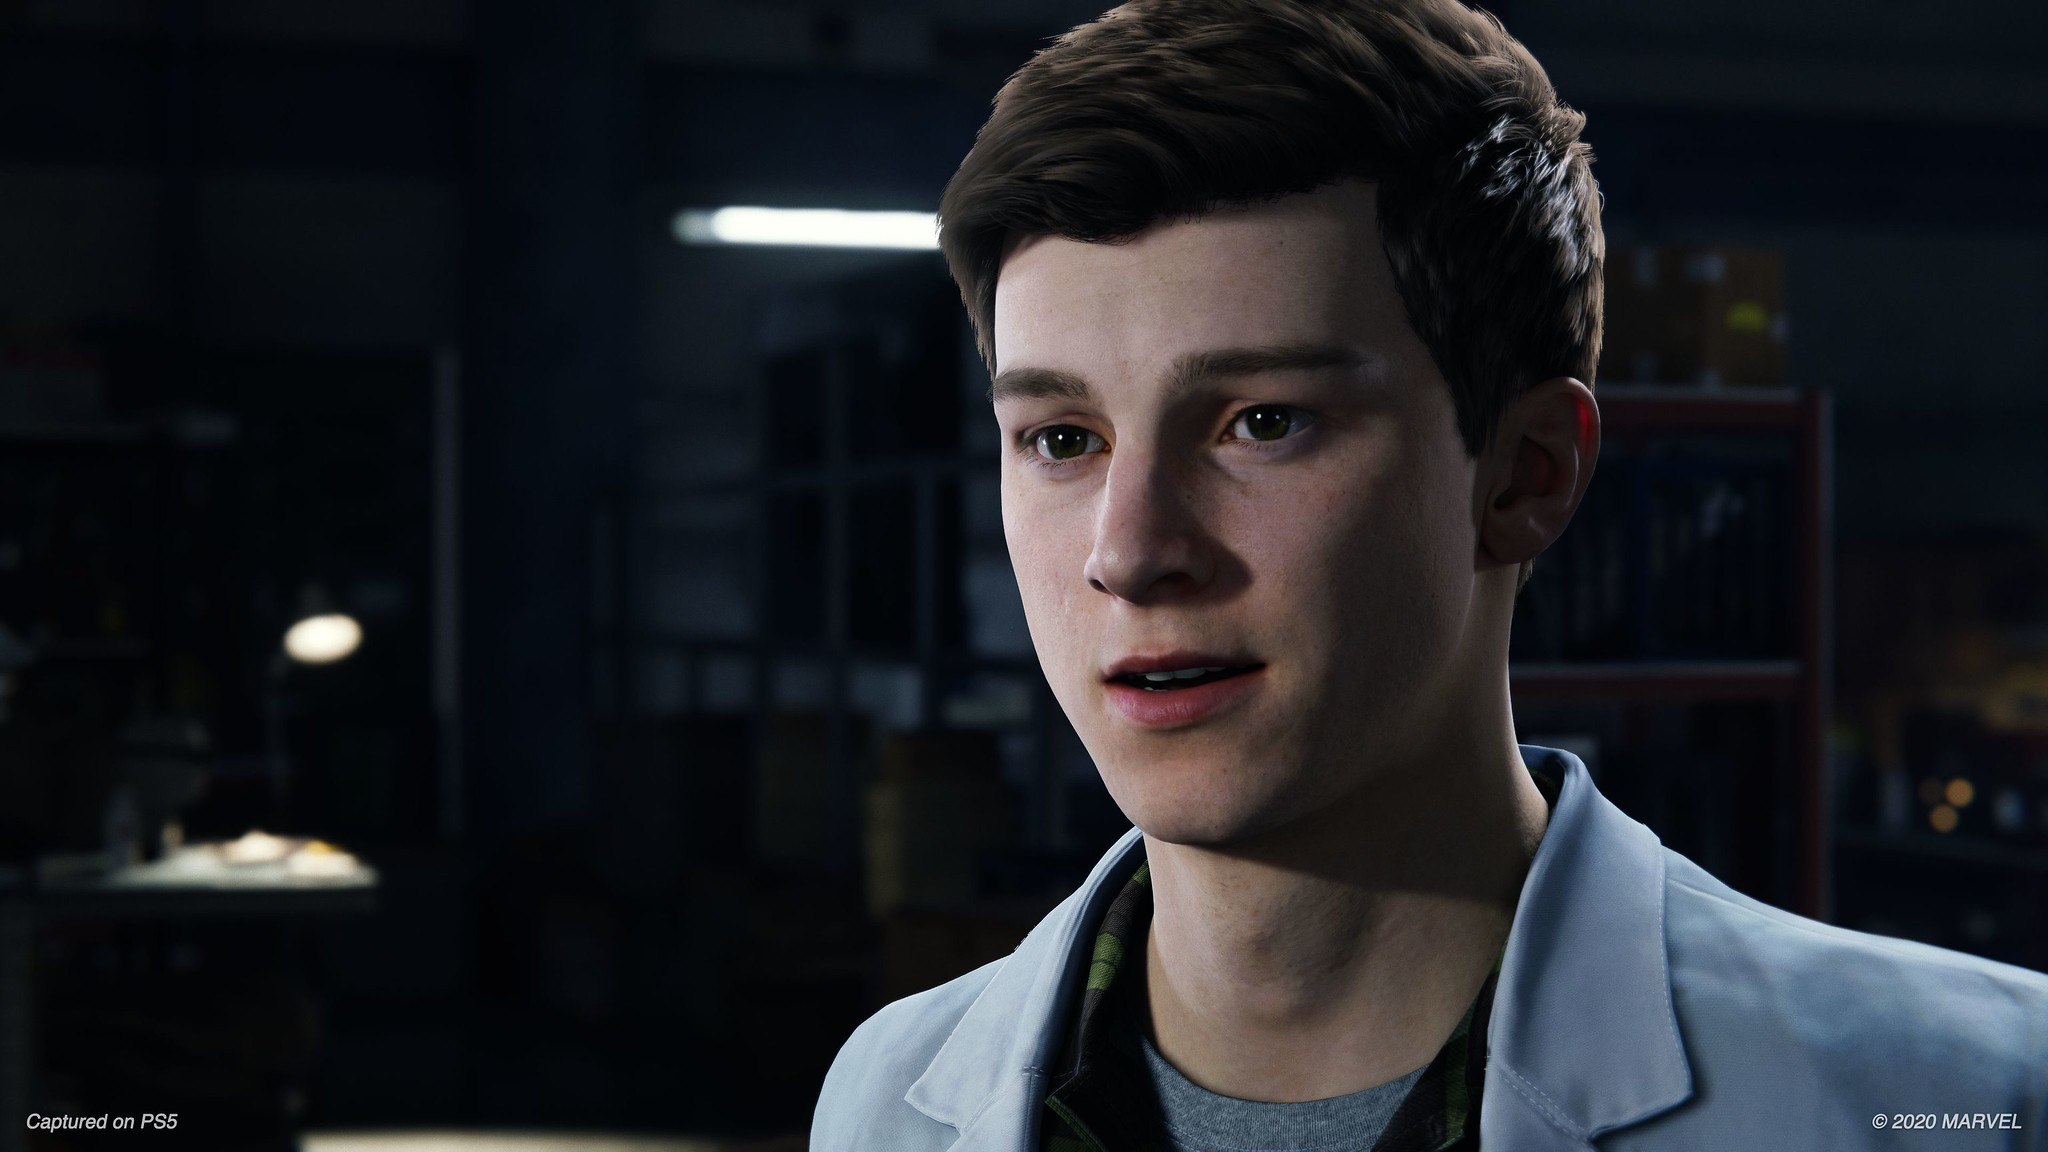 Marvel’s Spider-Man for PS5 features a new Peter Parker character model, and finally adds the stunning suit